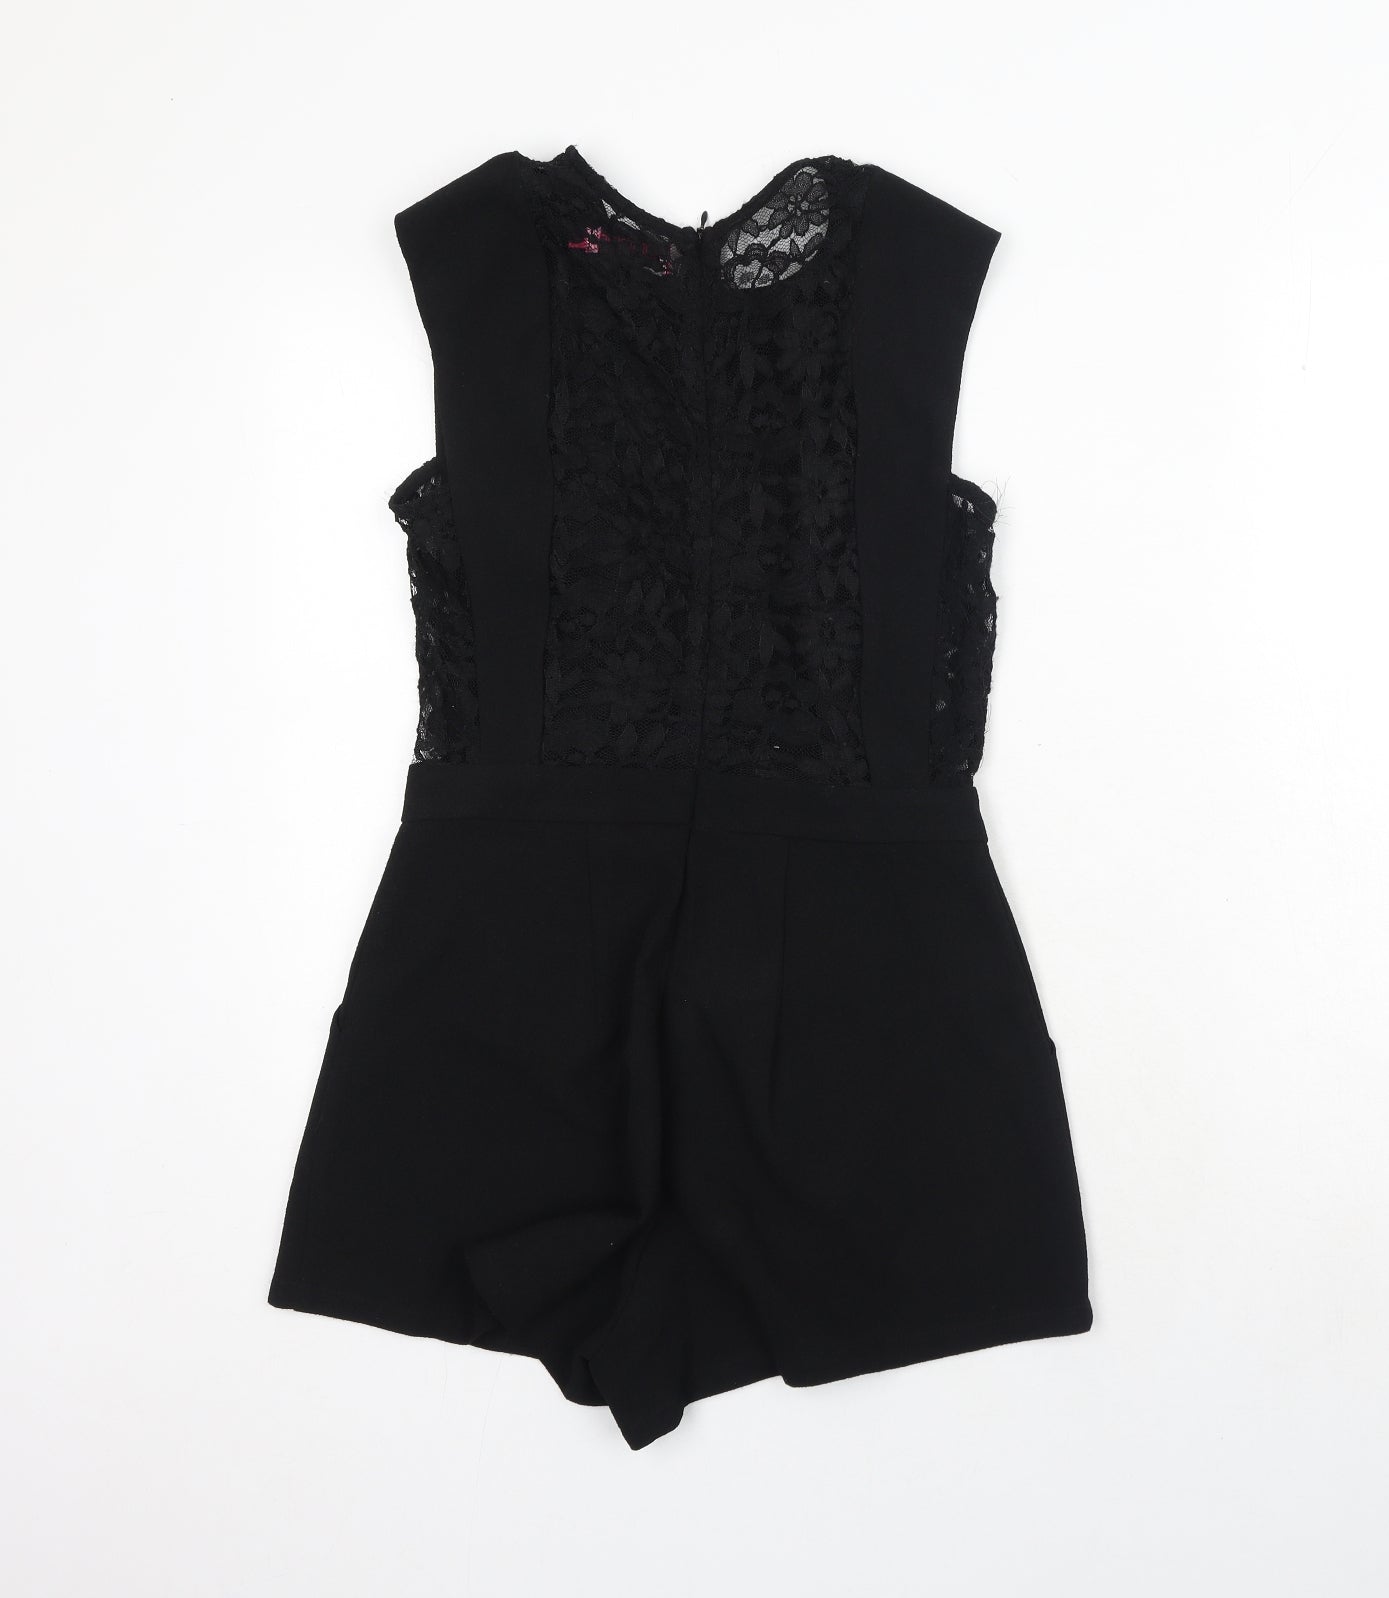 Boohoo Womens Black Polyester Playsuit One-Piece Size 6 Zip - Lace Detail